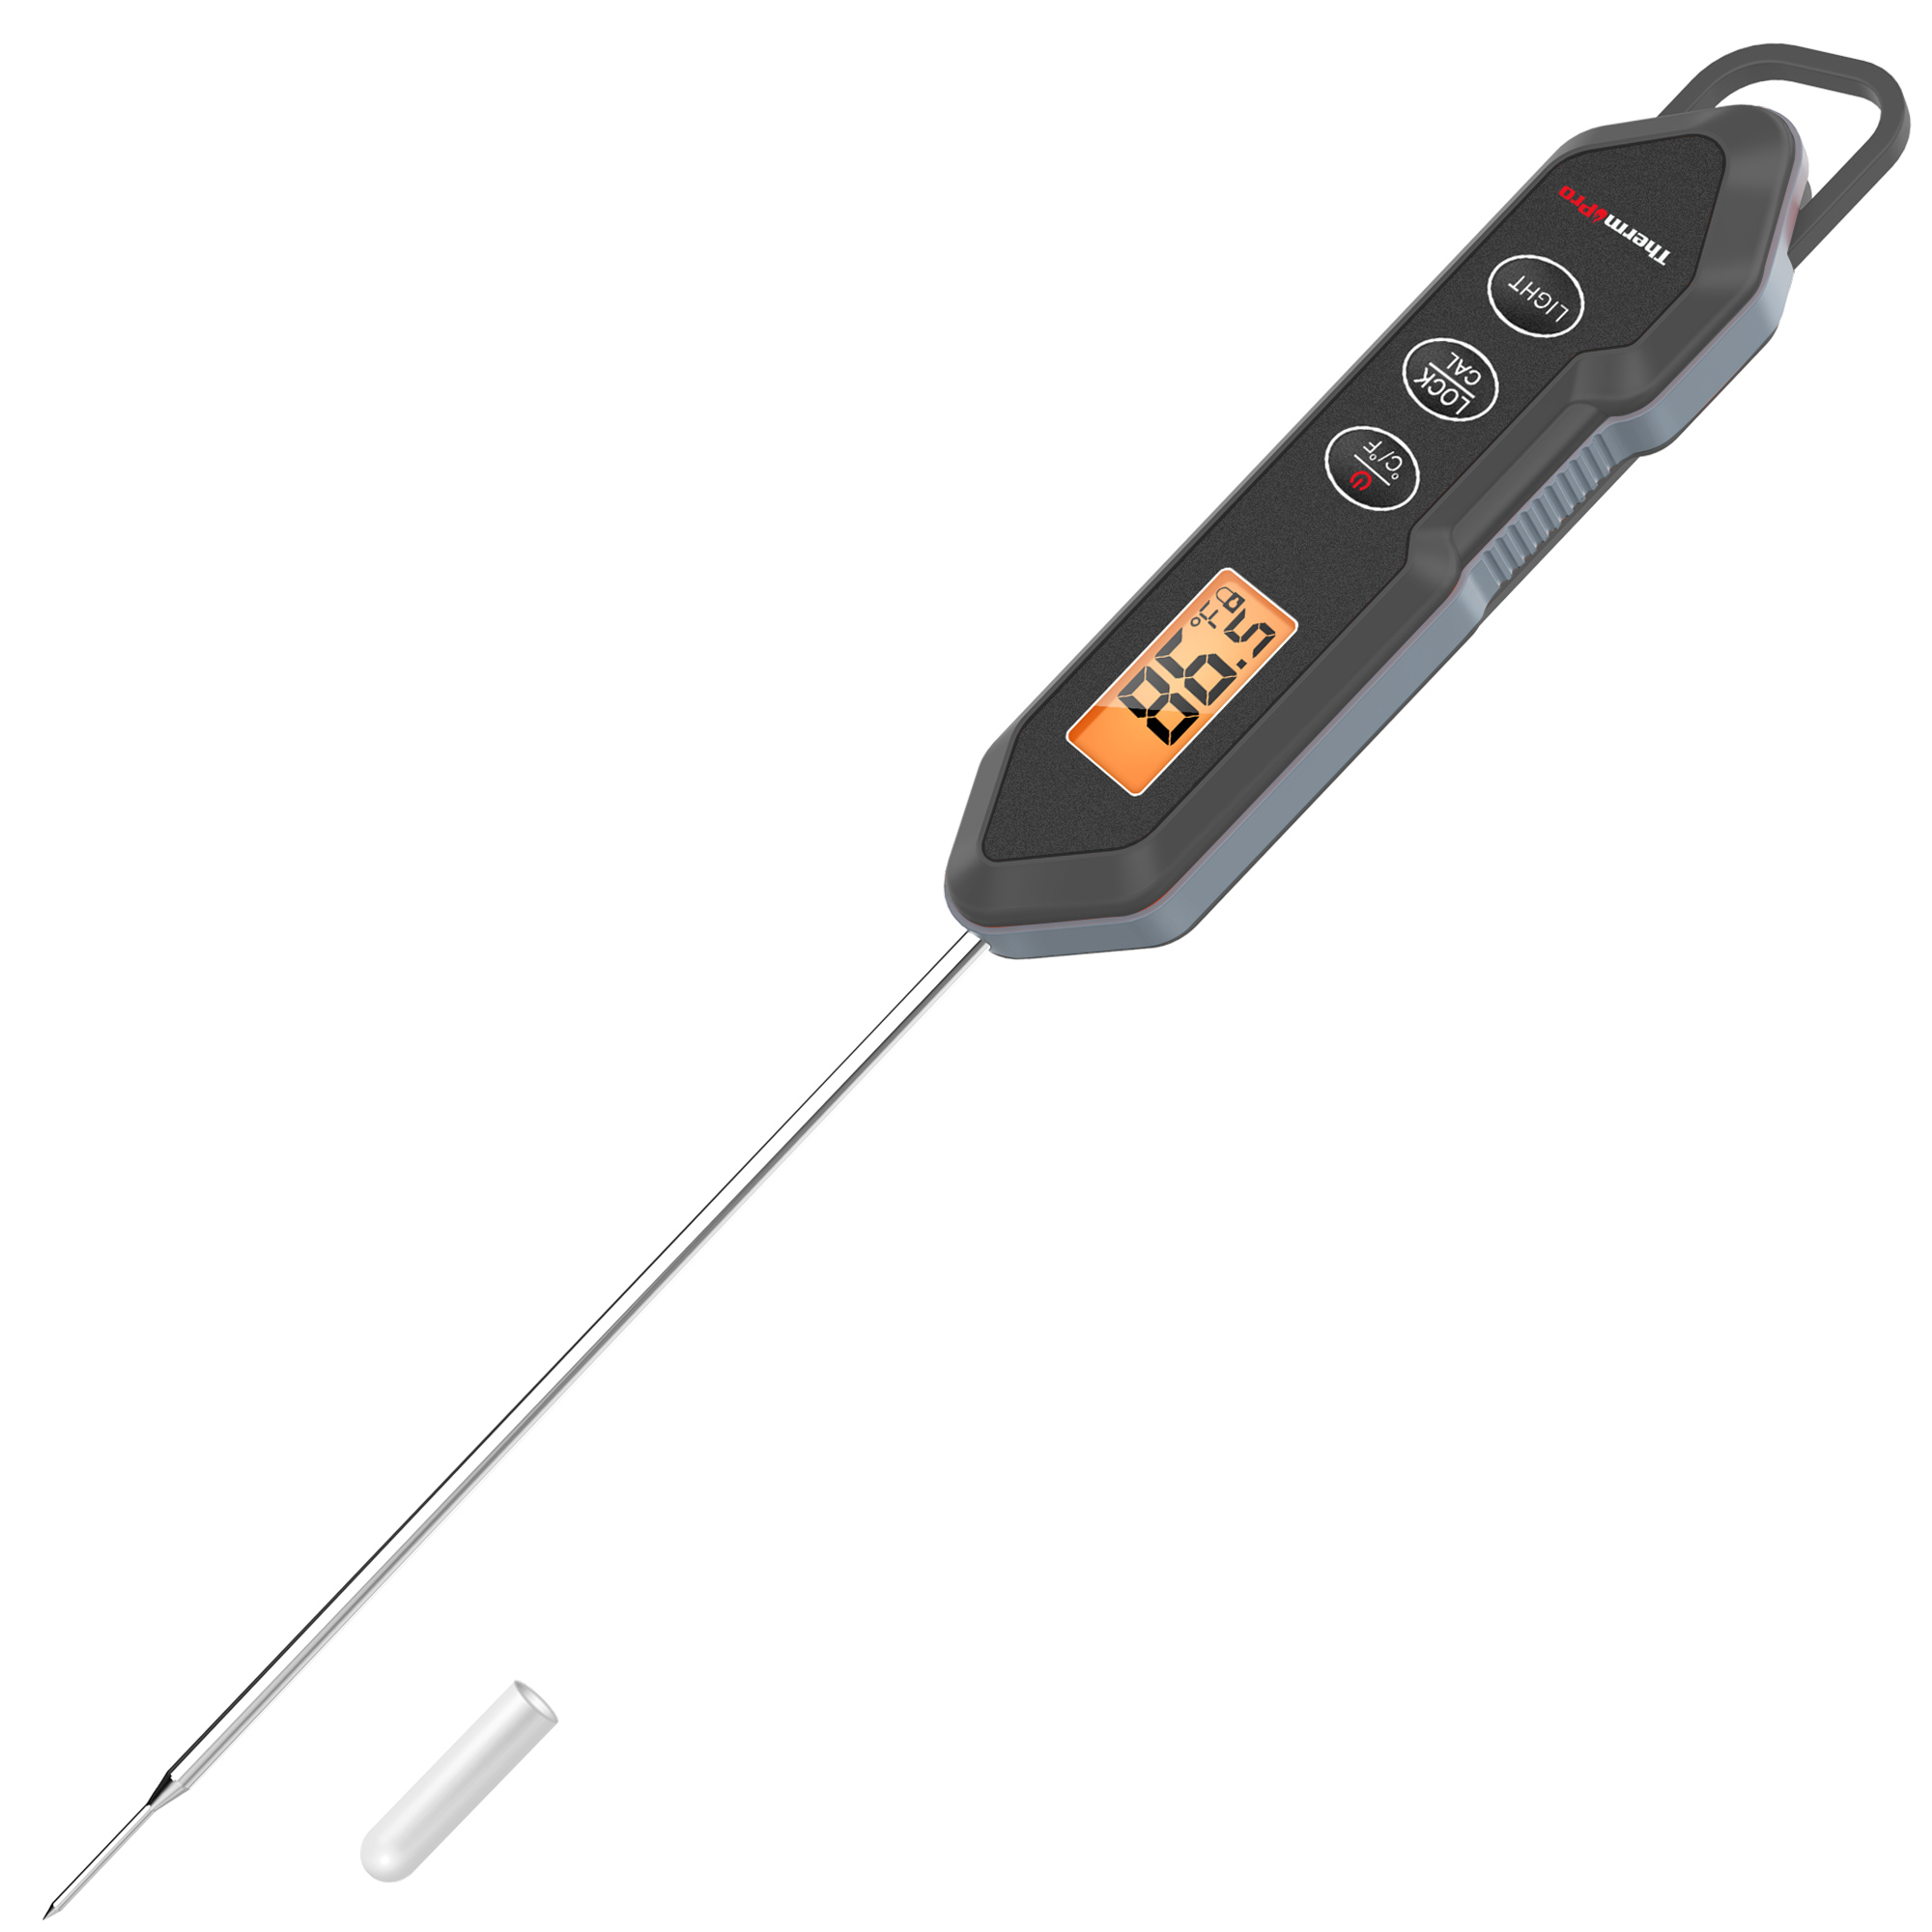 ThermoPro TP03H Meat Thermometer Waterproof Digital Instant Read for  Grilling Waterproof Kitchen Food Thermometer with Calibration & Backlight  Smoker Oil Fry Candy Thermometer 